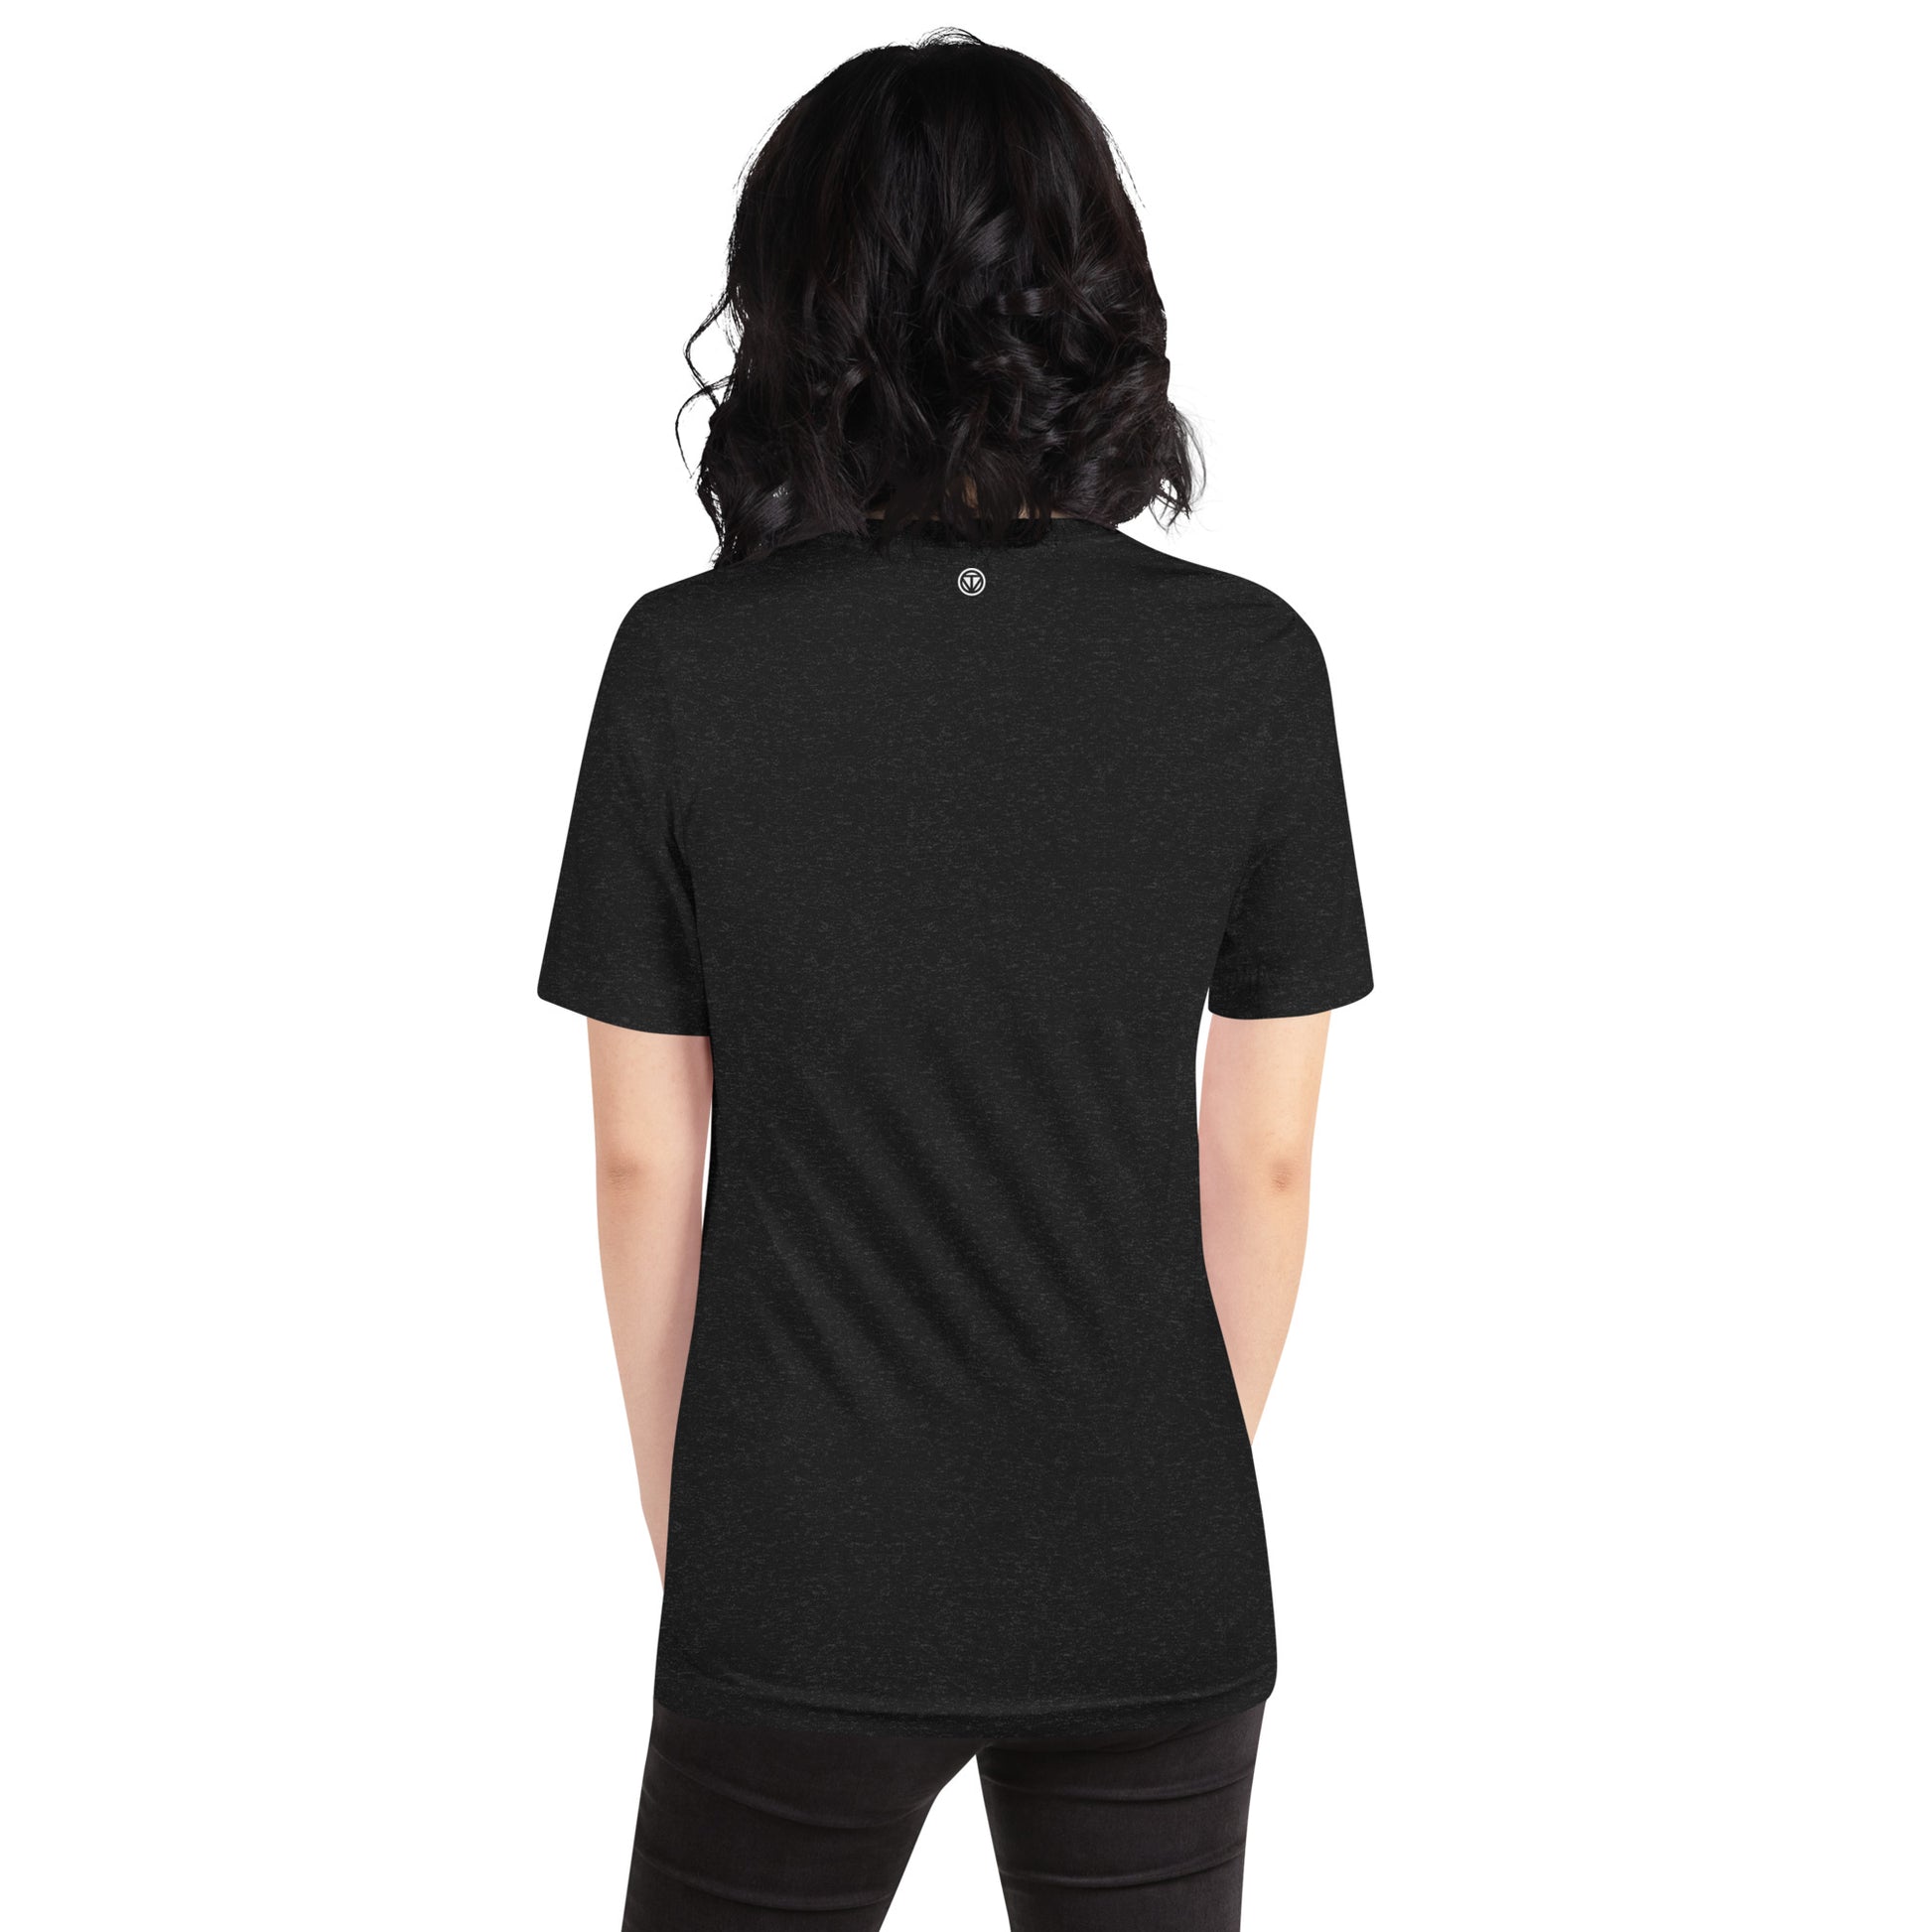 TIME OF VIBES - Women`s Cotton T-Shirt TIME (Black) - €29.00